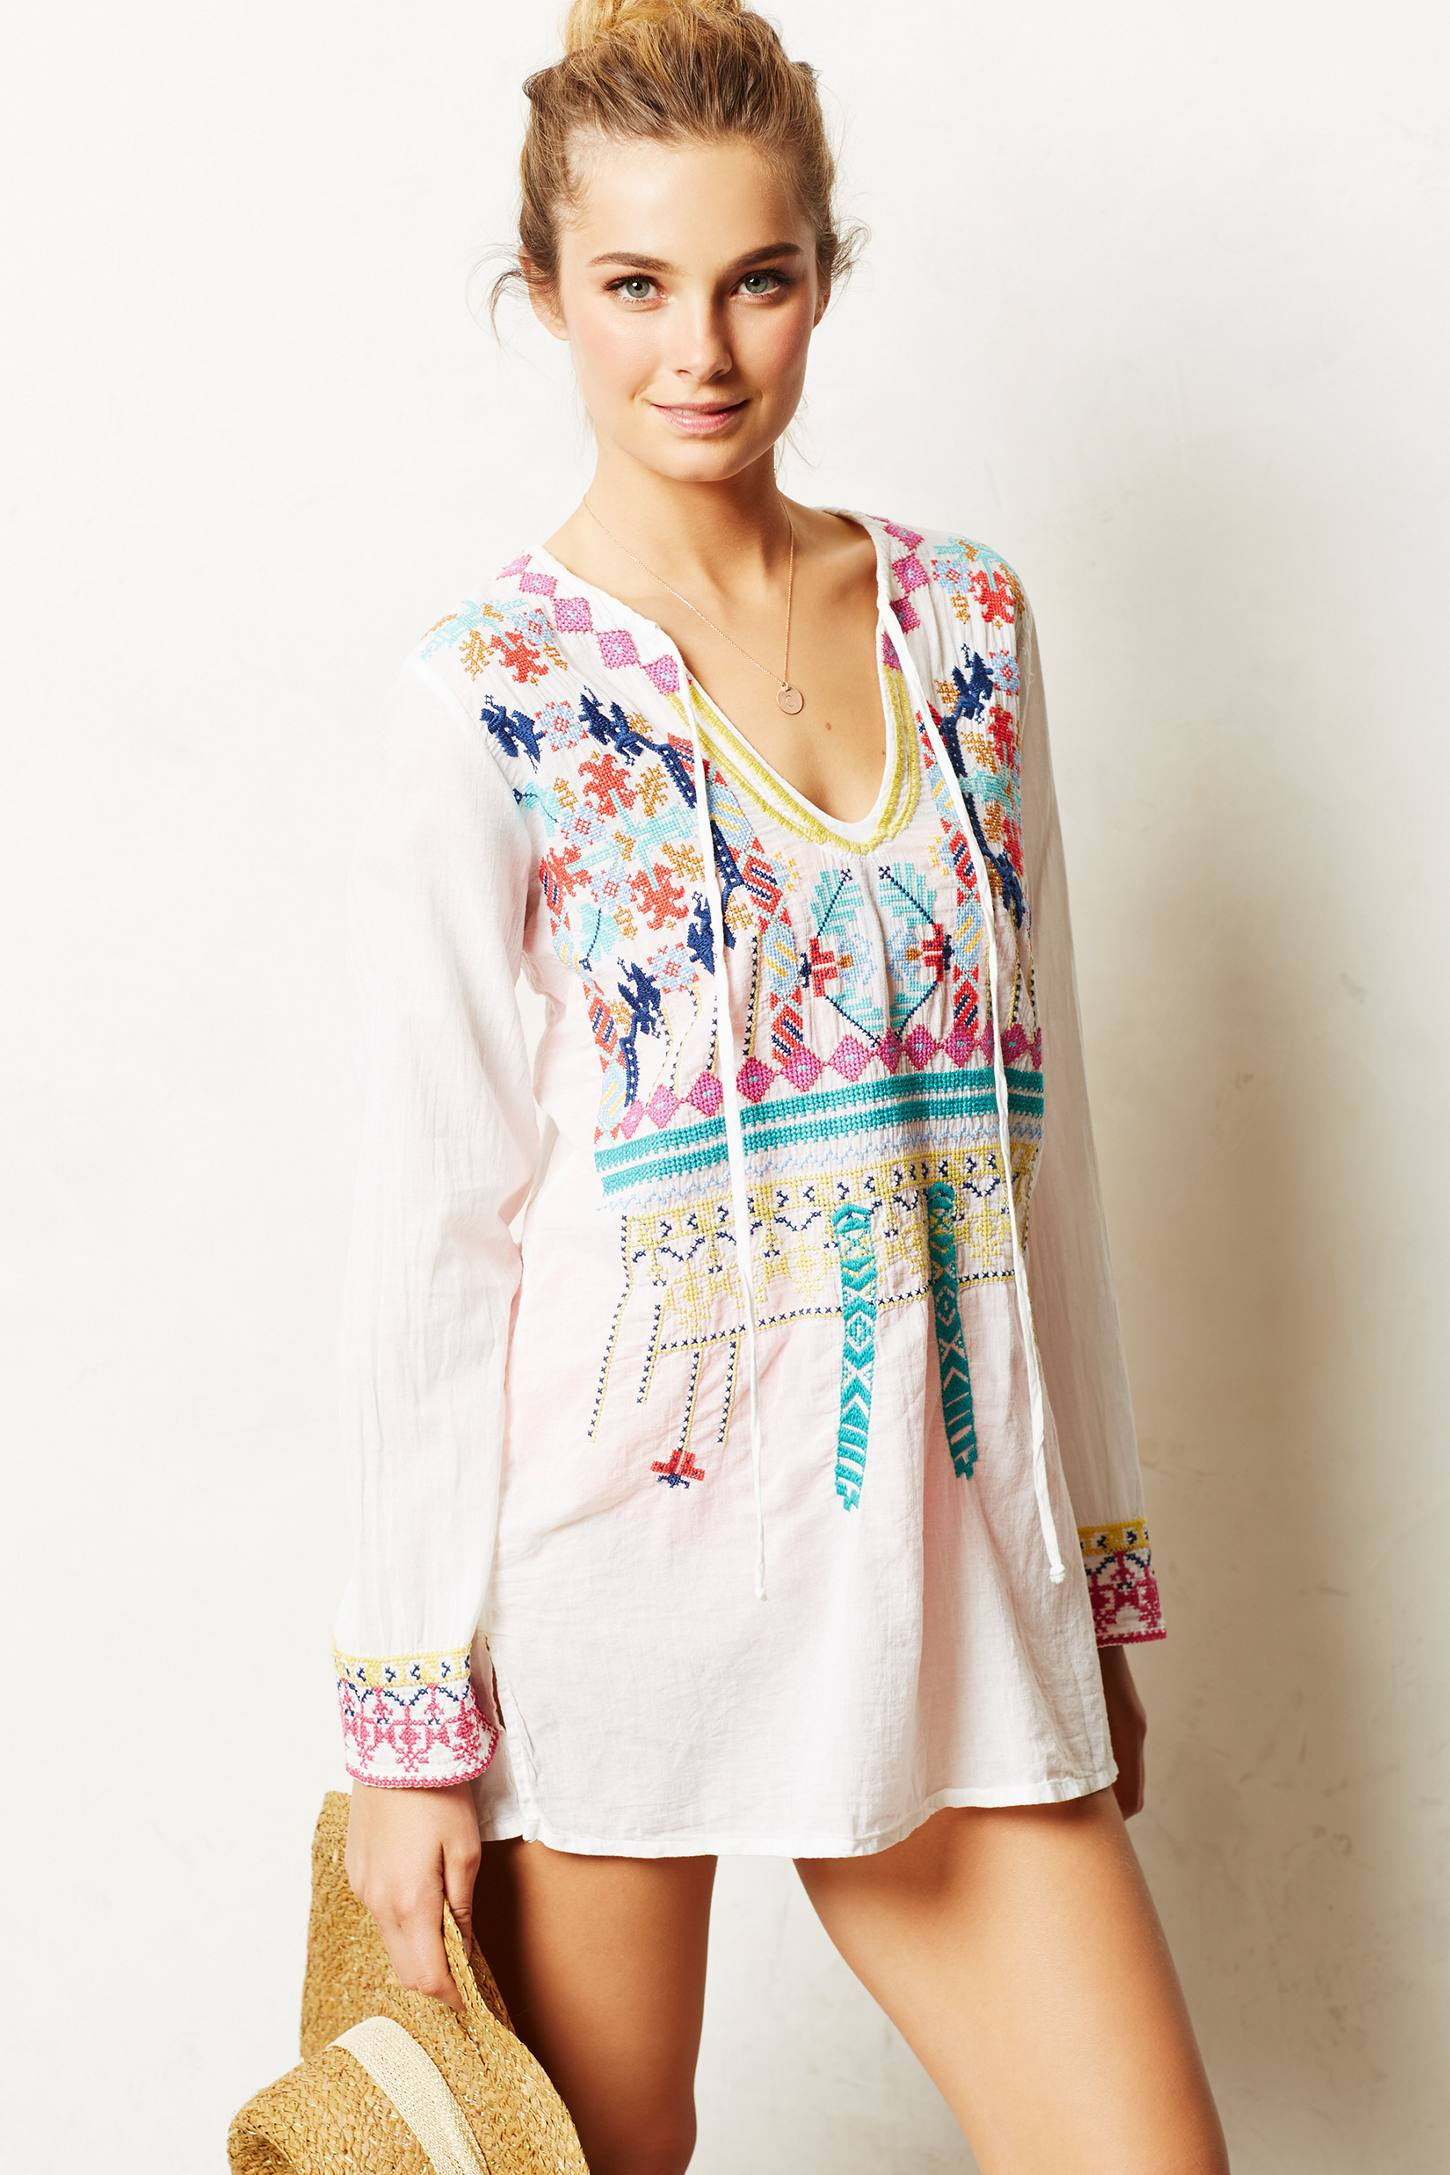 Lyst - Anthropologie Embroidered Utara Cover-Up in White